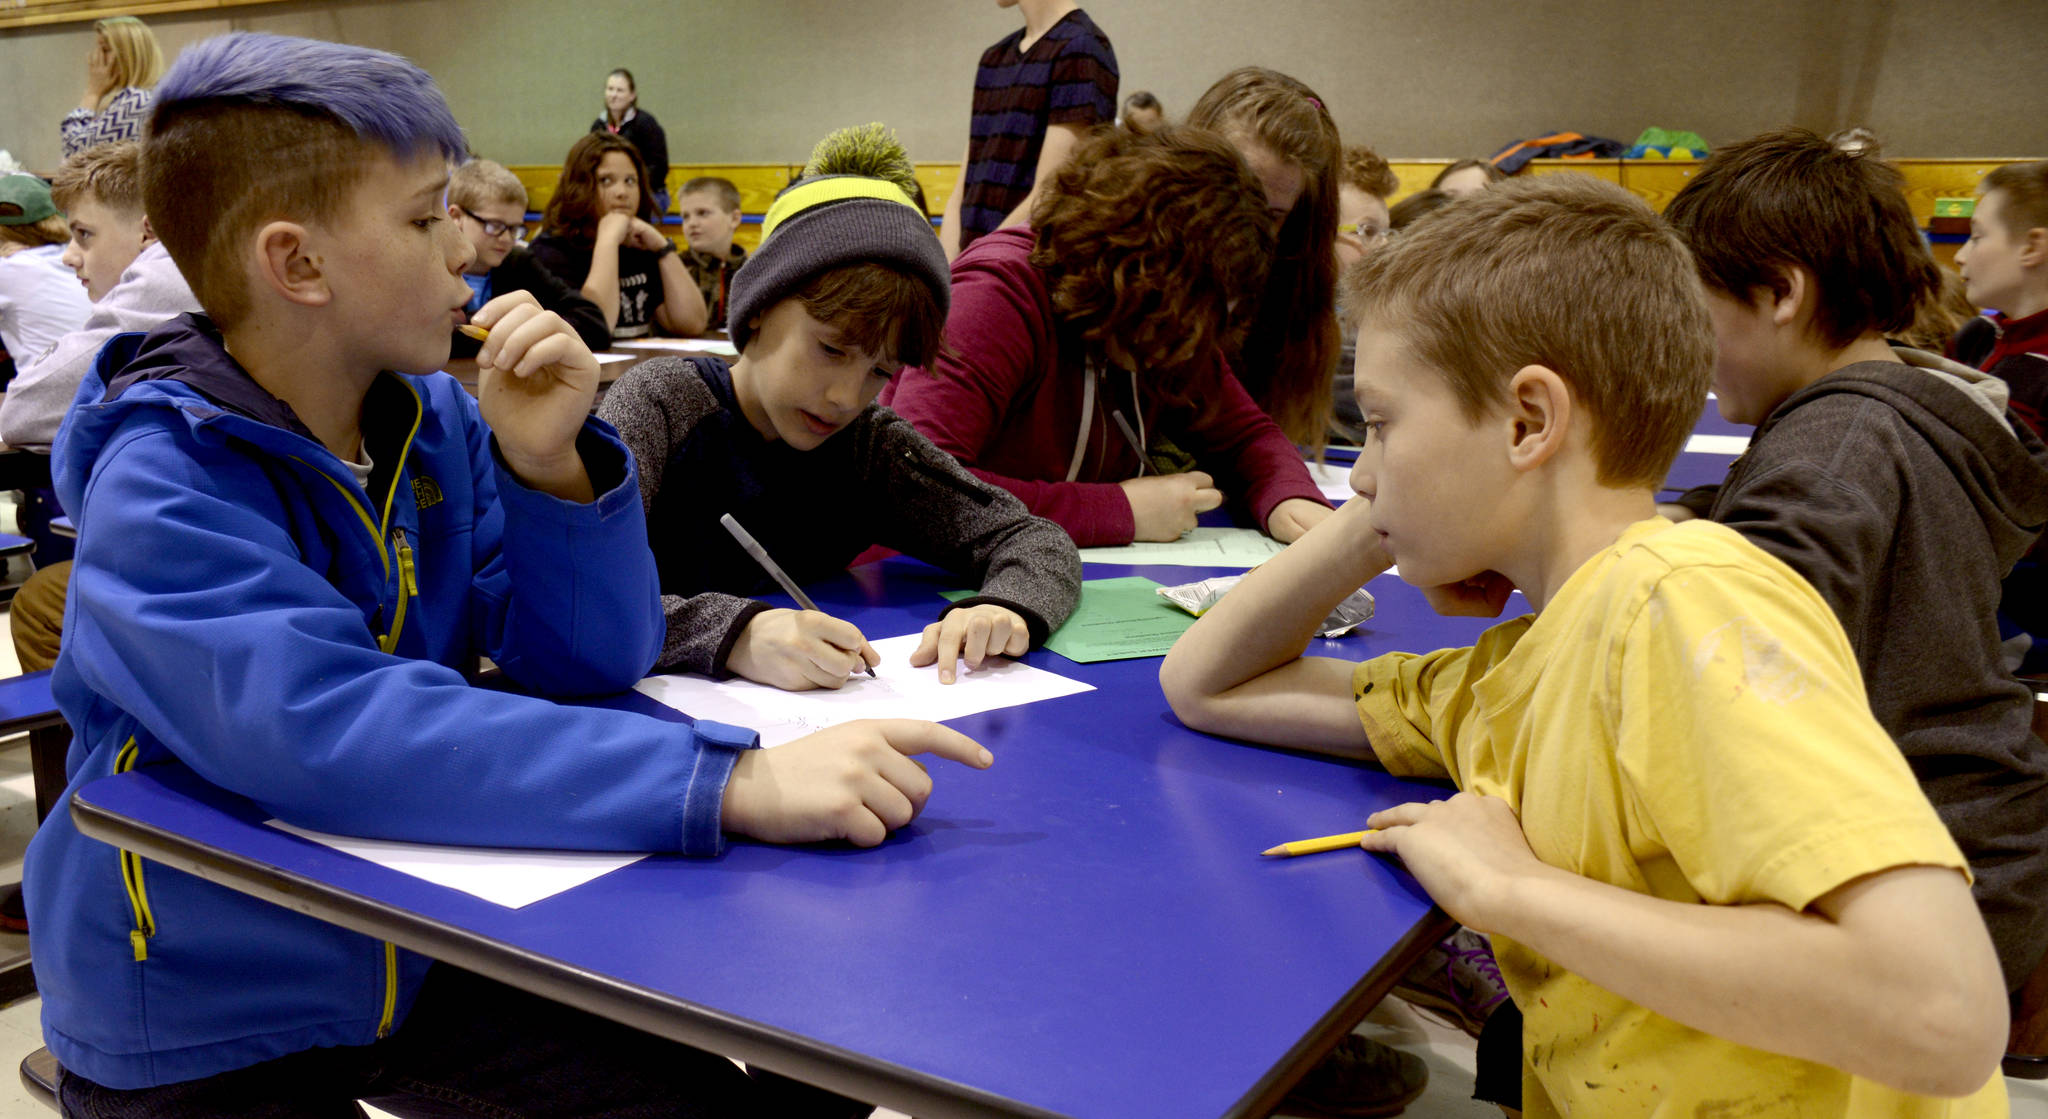 Terry Yerly, left, and Brenden Jones, fourth-graders from Tustumena Elementary School, race against the clock during lightning round of the elementary school math meet at Mountain View Elementary on Thursday, May 4, 2017 in Kenai, Alaska. The meet brought together 120 fourth, fifth and sixth-graders from across the Kenai Peninsula Borough School District. (Kat Sorensen/Peninsula Clarion)